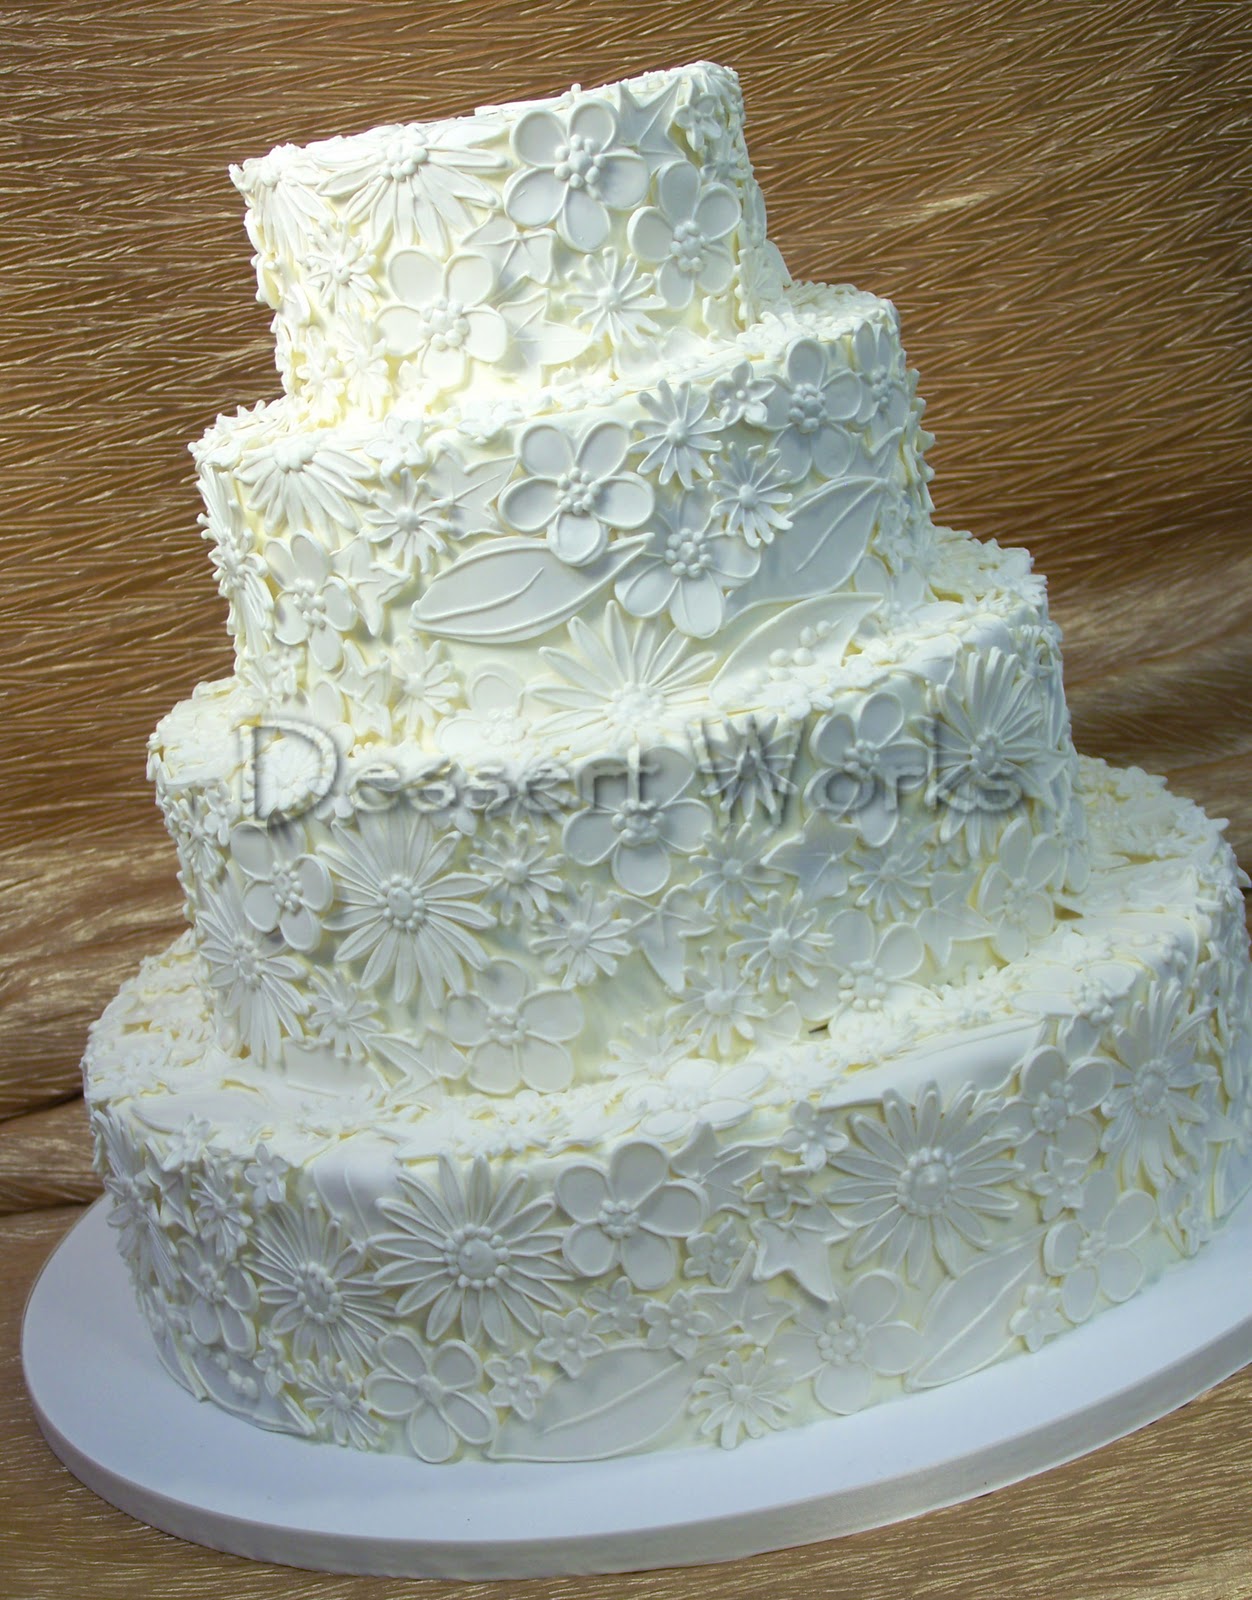 buttercream wedding cake designs Posted by Jacqueline M at 8:51 AM 1 comment: